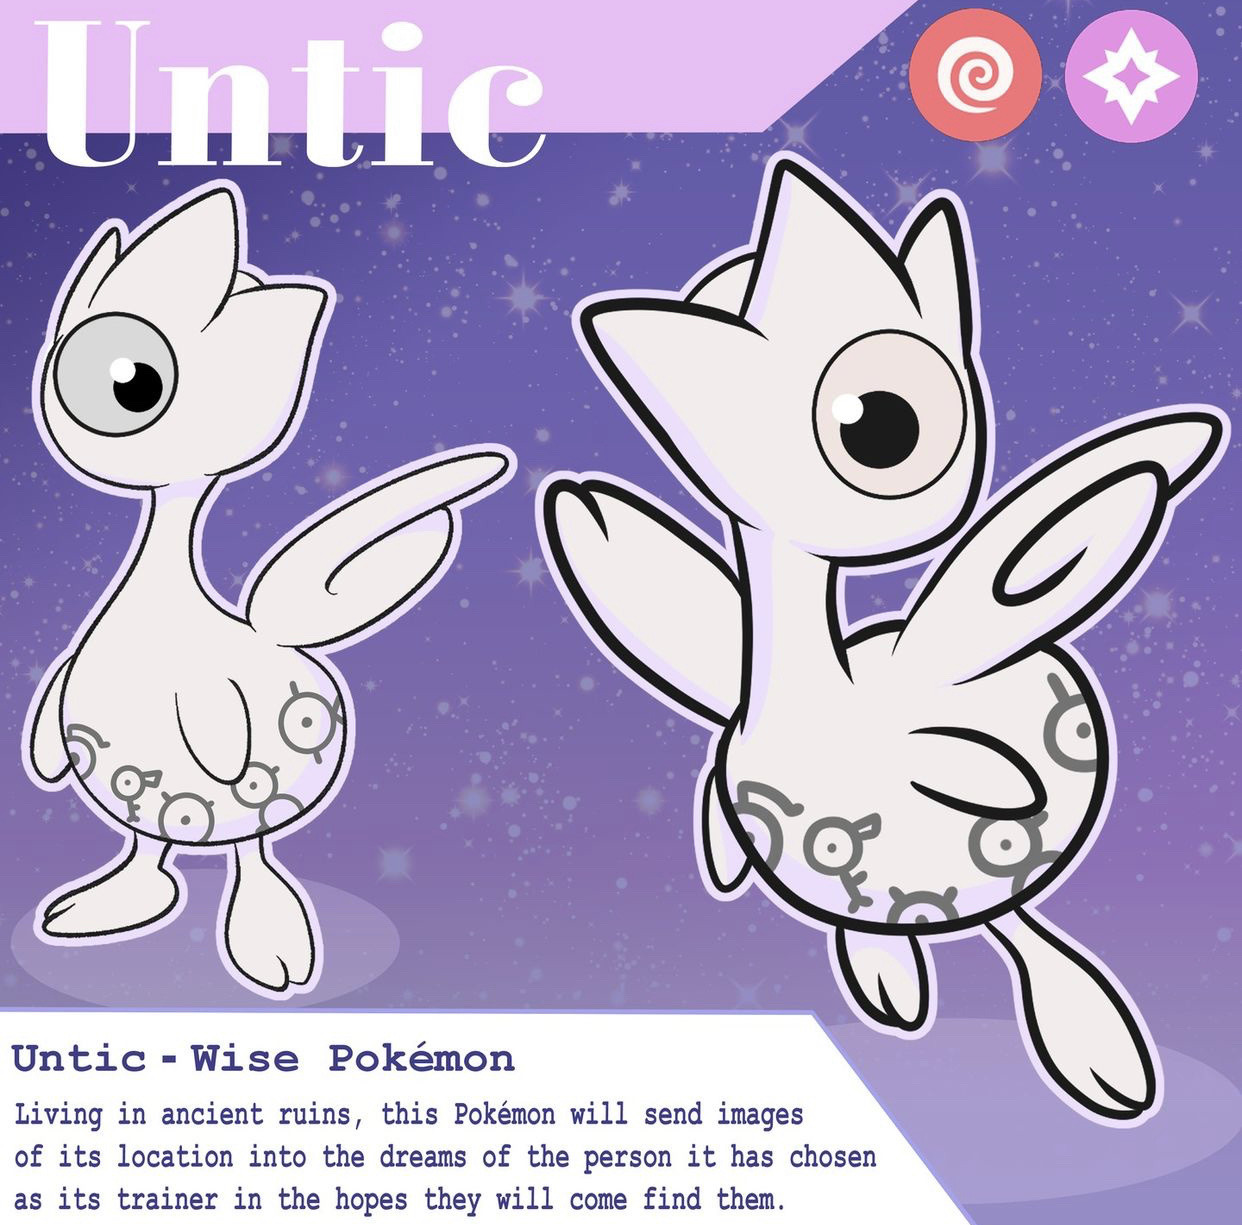 Pokédex of Anomalies — A Togepi/Unown fusion evolution line! Be not